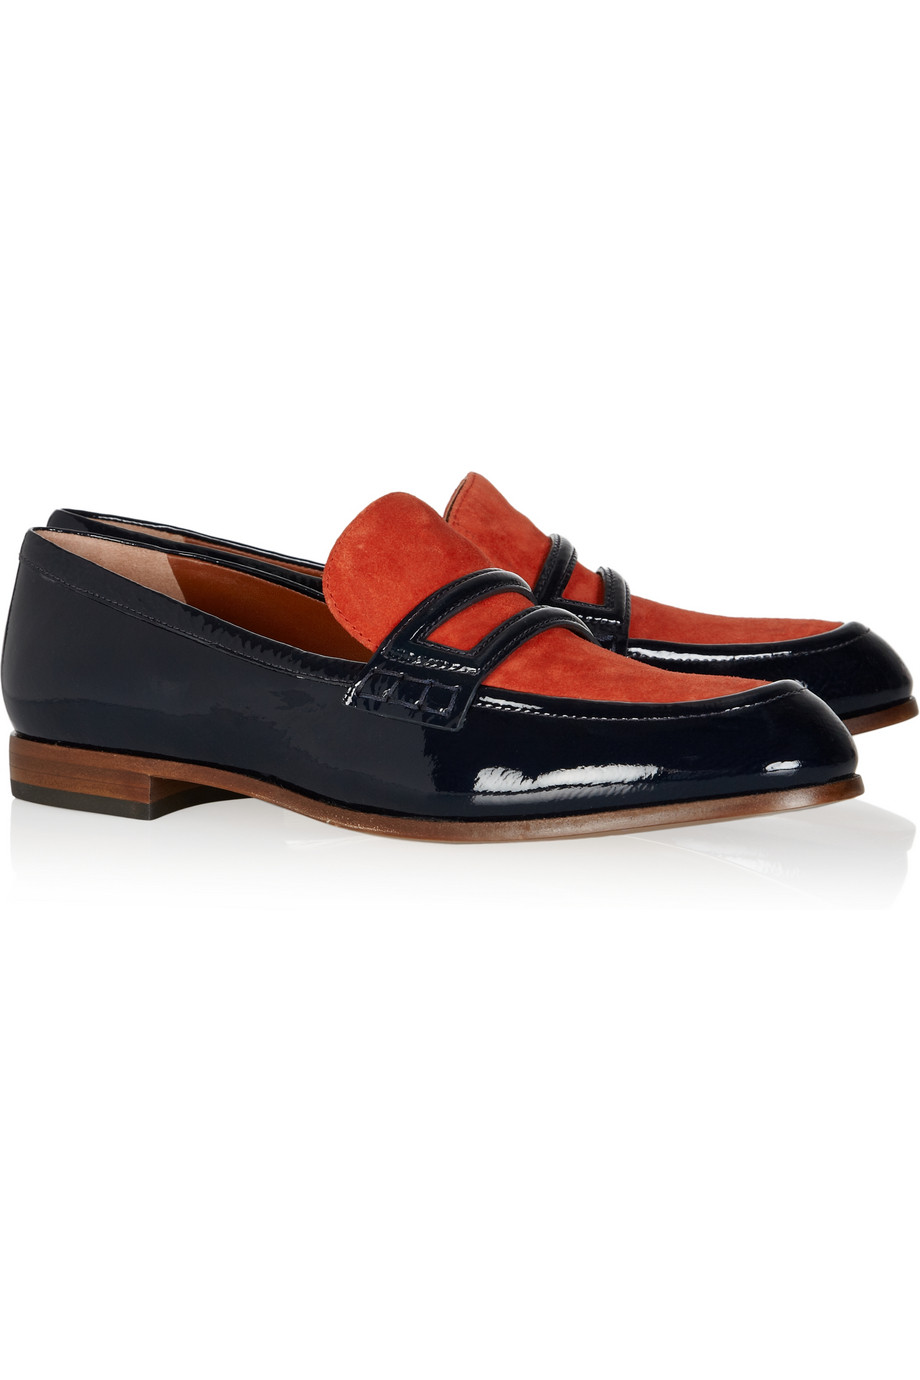 Marc By Marc Jacobs Francesina Patent Leather and Suede Loafers in Blue ...